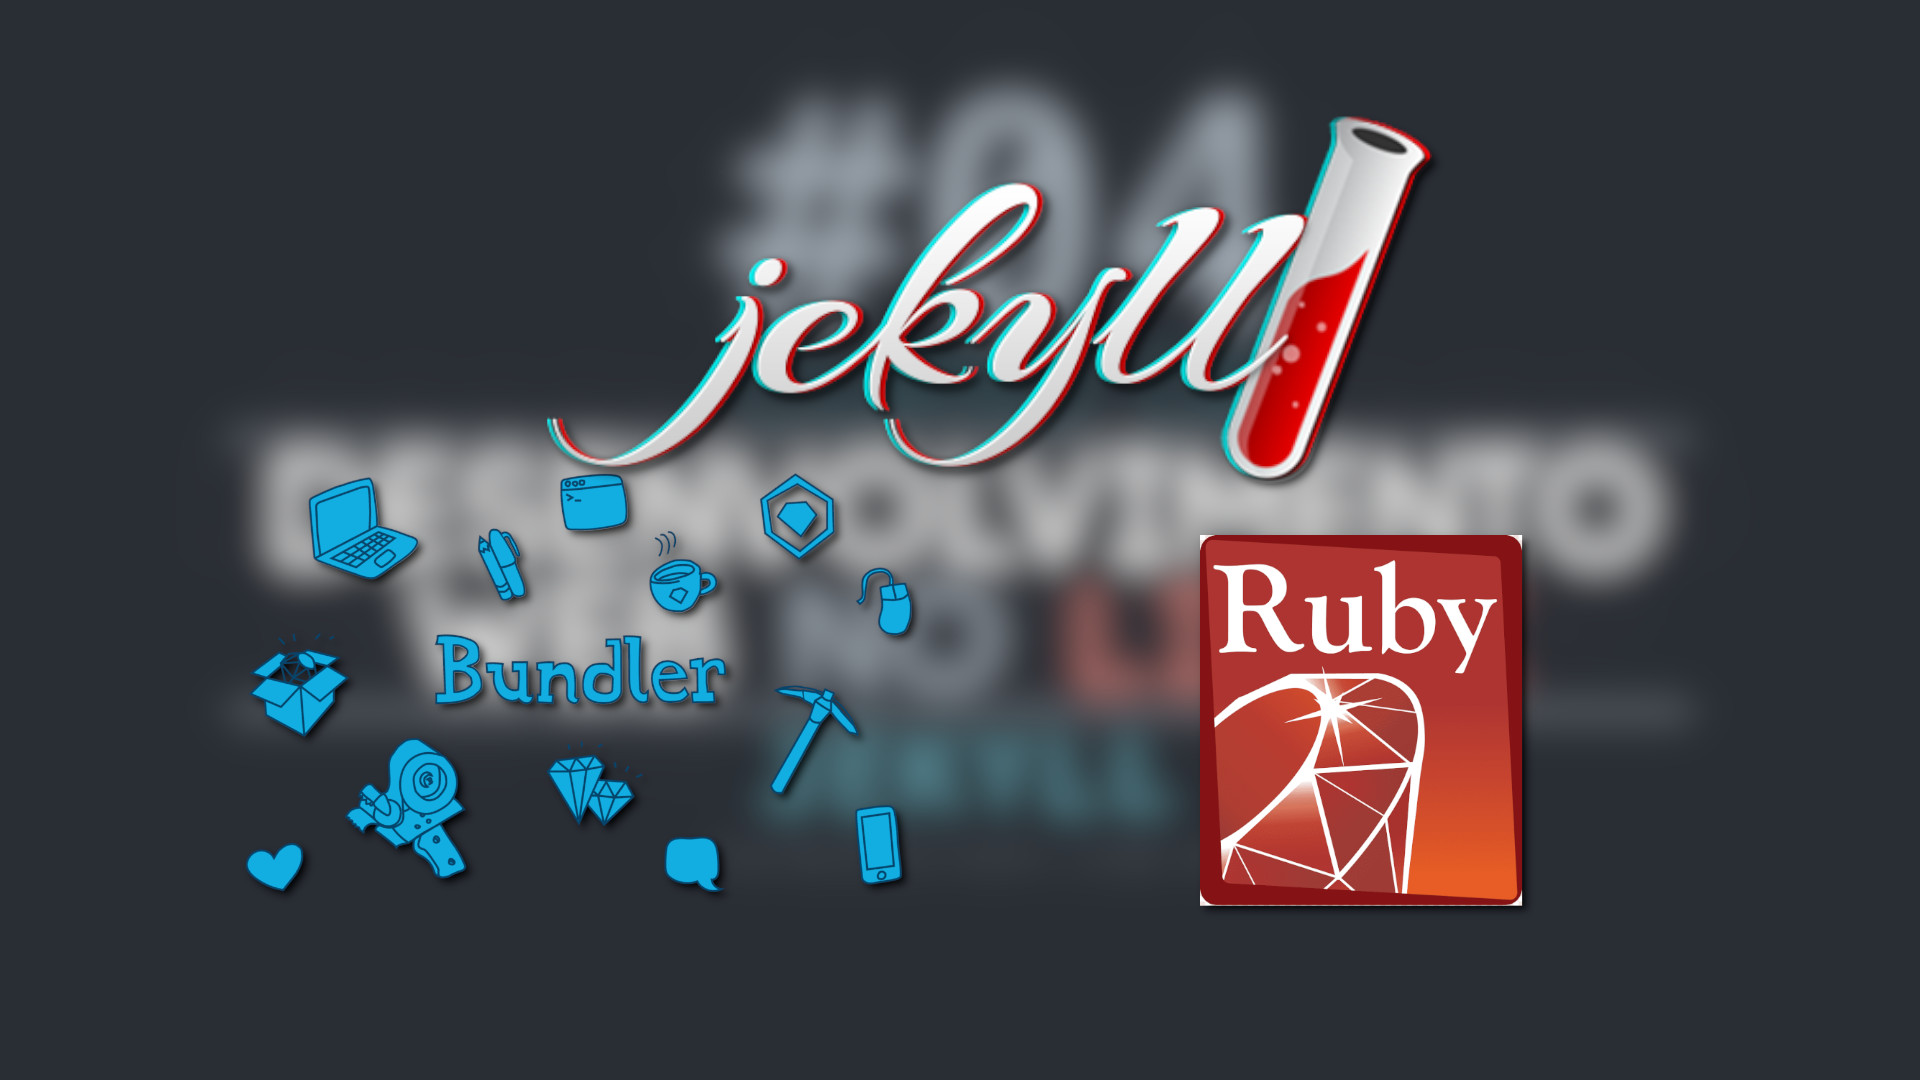 How to Properly Install Ruby, Bundler and Jekyll on Ubuntu Linux